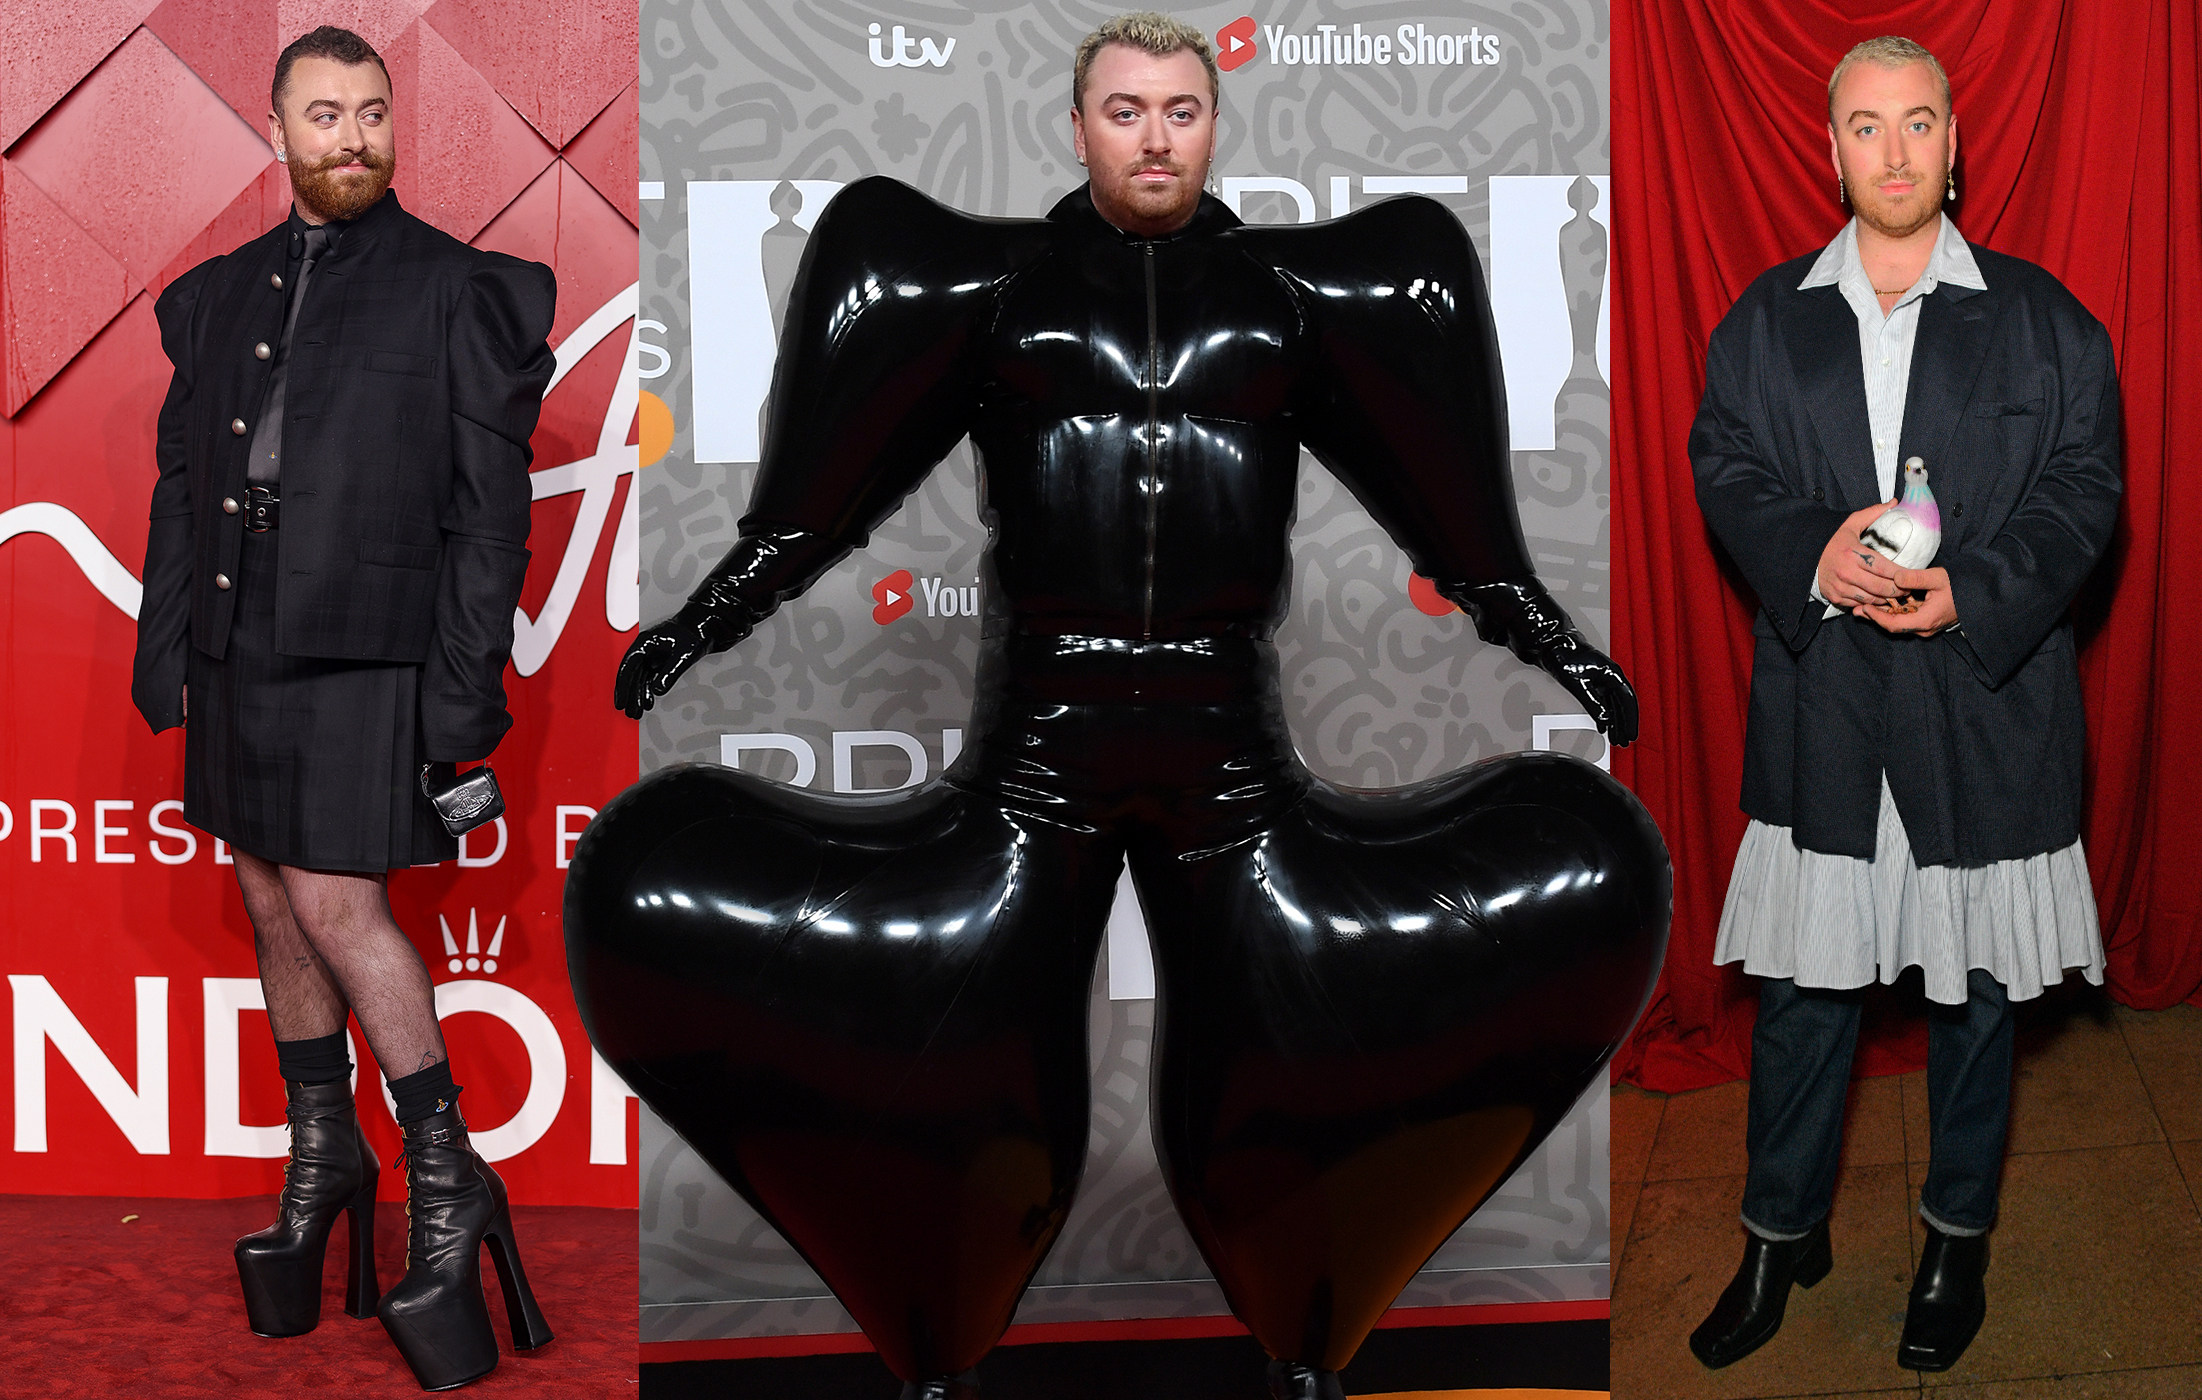 Sam Smith has donned some striking looks over the years. Photos: Getty Images/AP